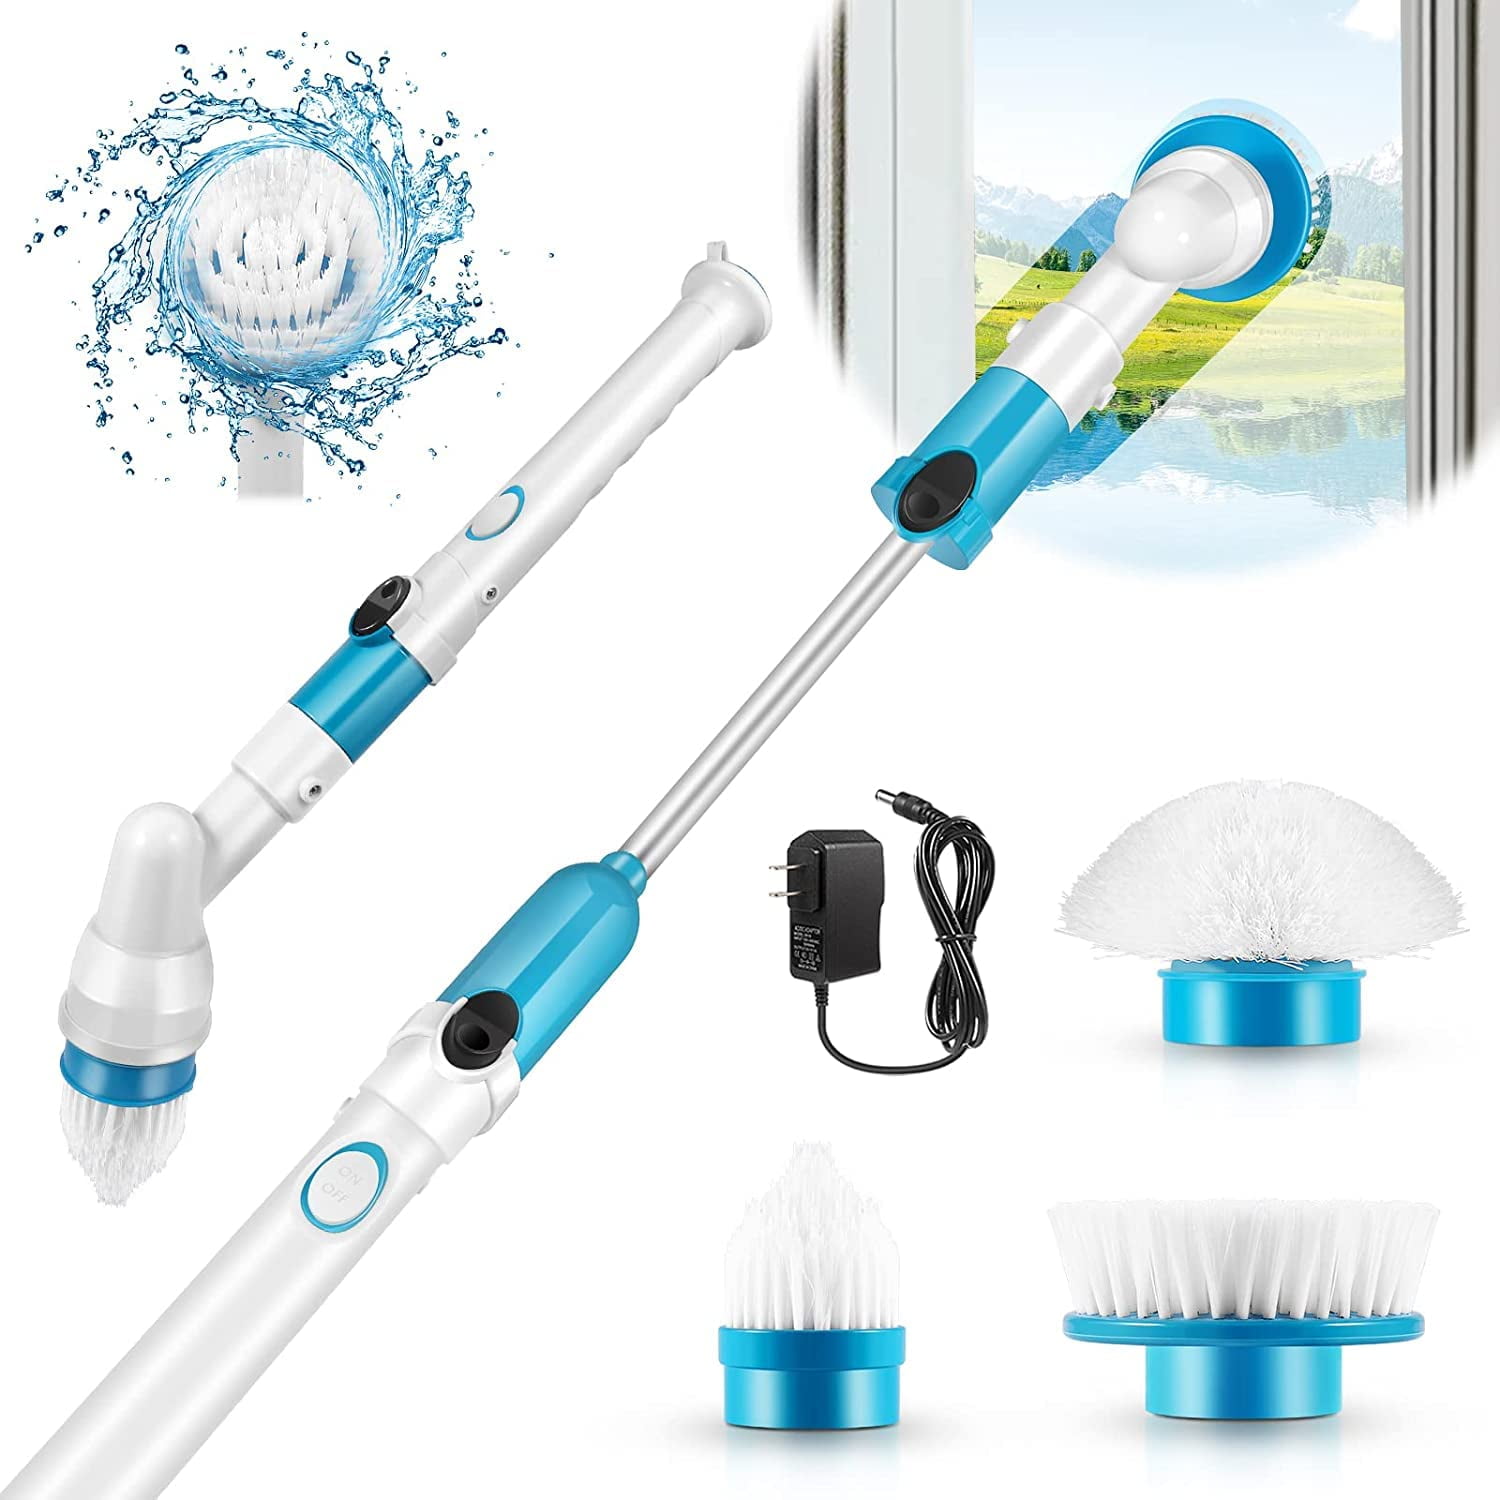 Dropship Electric Spin Scrubber Turbo Scrub Cleaning Brush Cordless  Chargeable Bathroom Cleaner With Extensio to Sell Online at a Lower Price